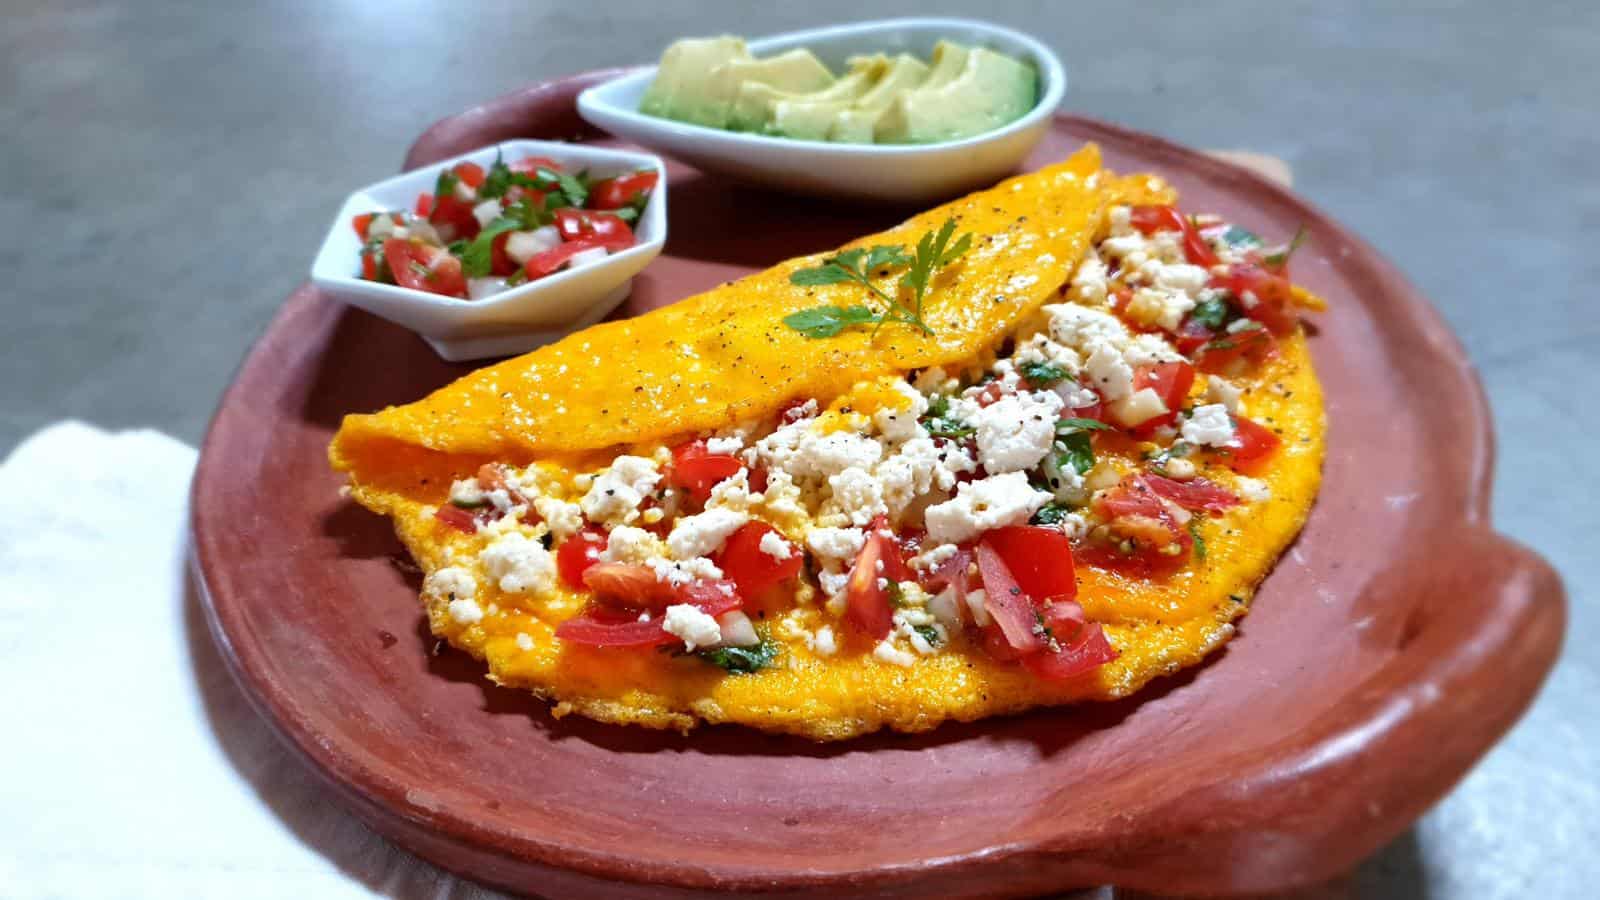 Mexican omelette folded with queso fresco and salsa on earthen serving tray.